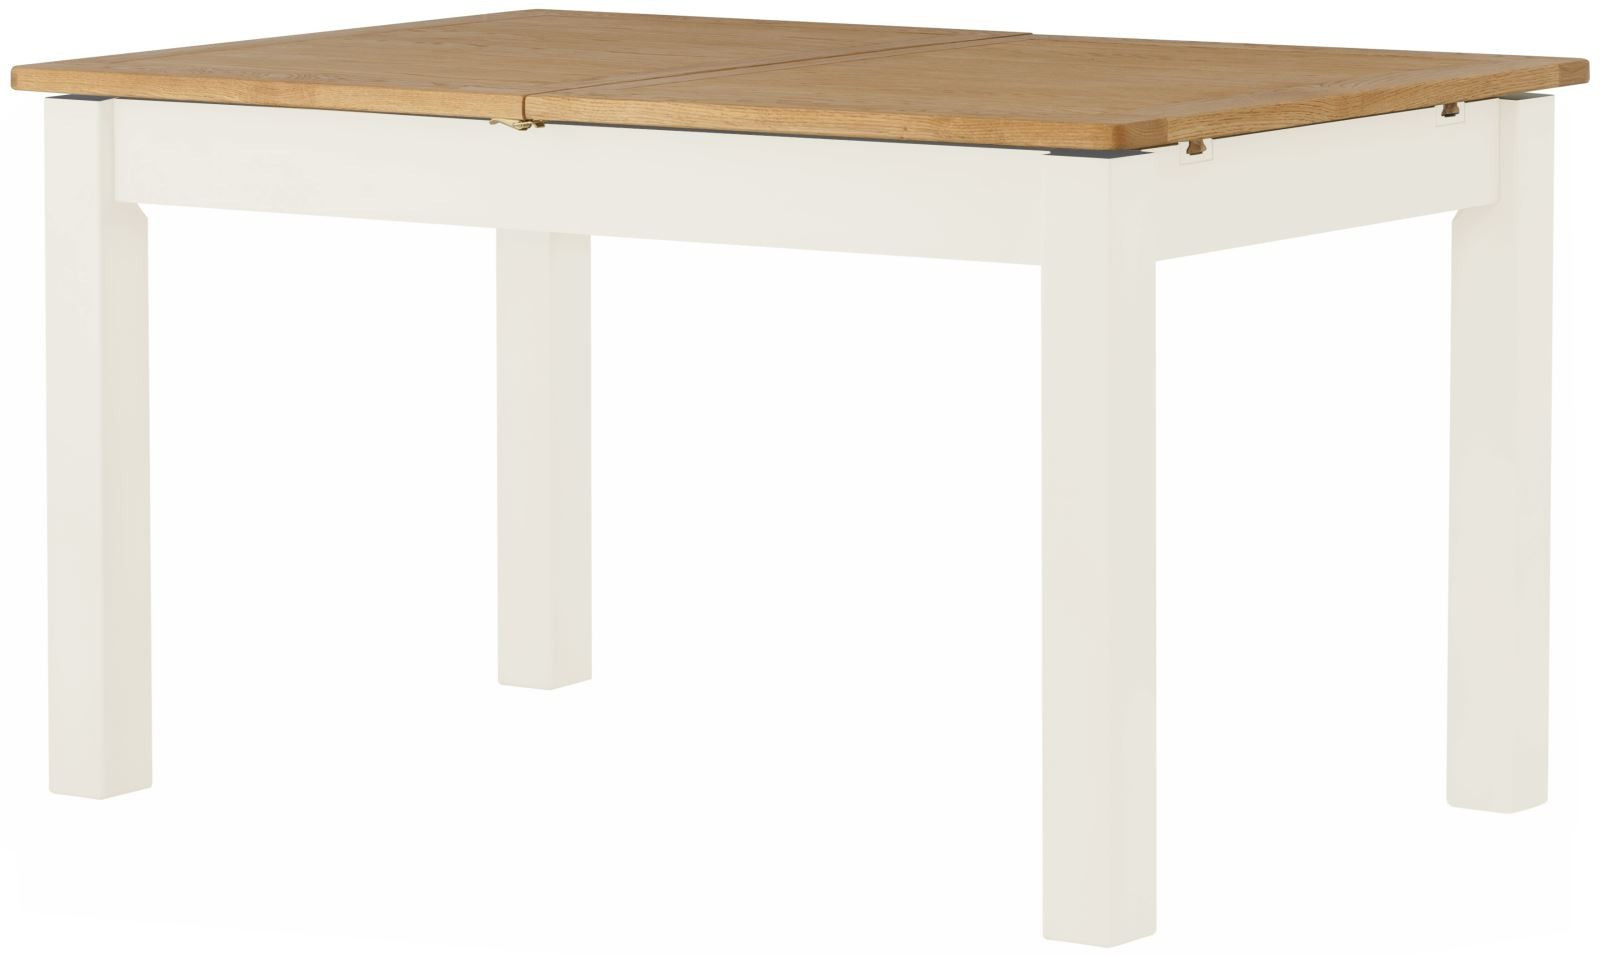 Farmhouse Extending Dining Table Oak, White Top Dining Table